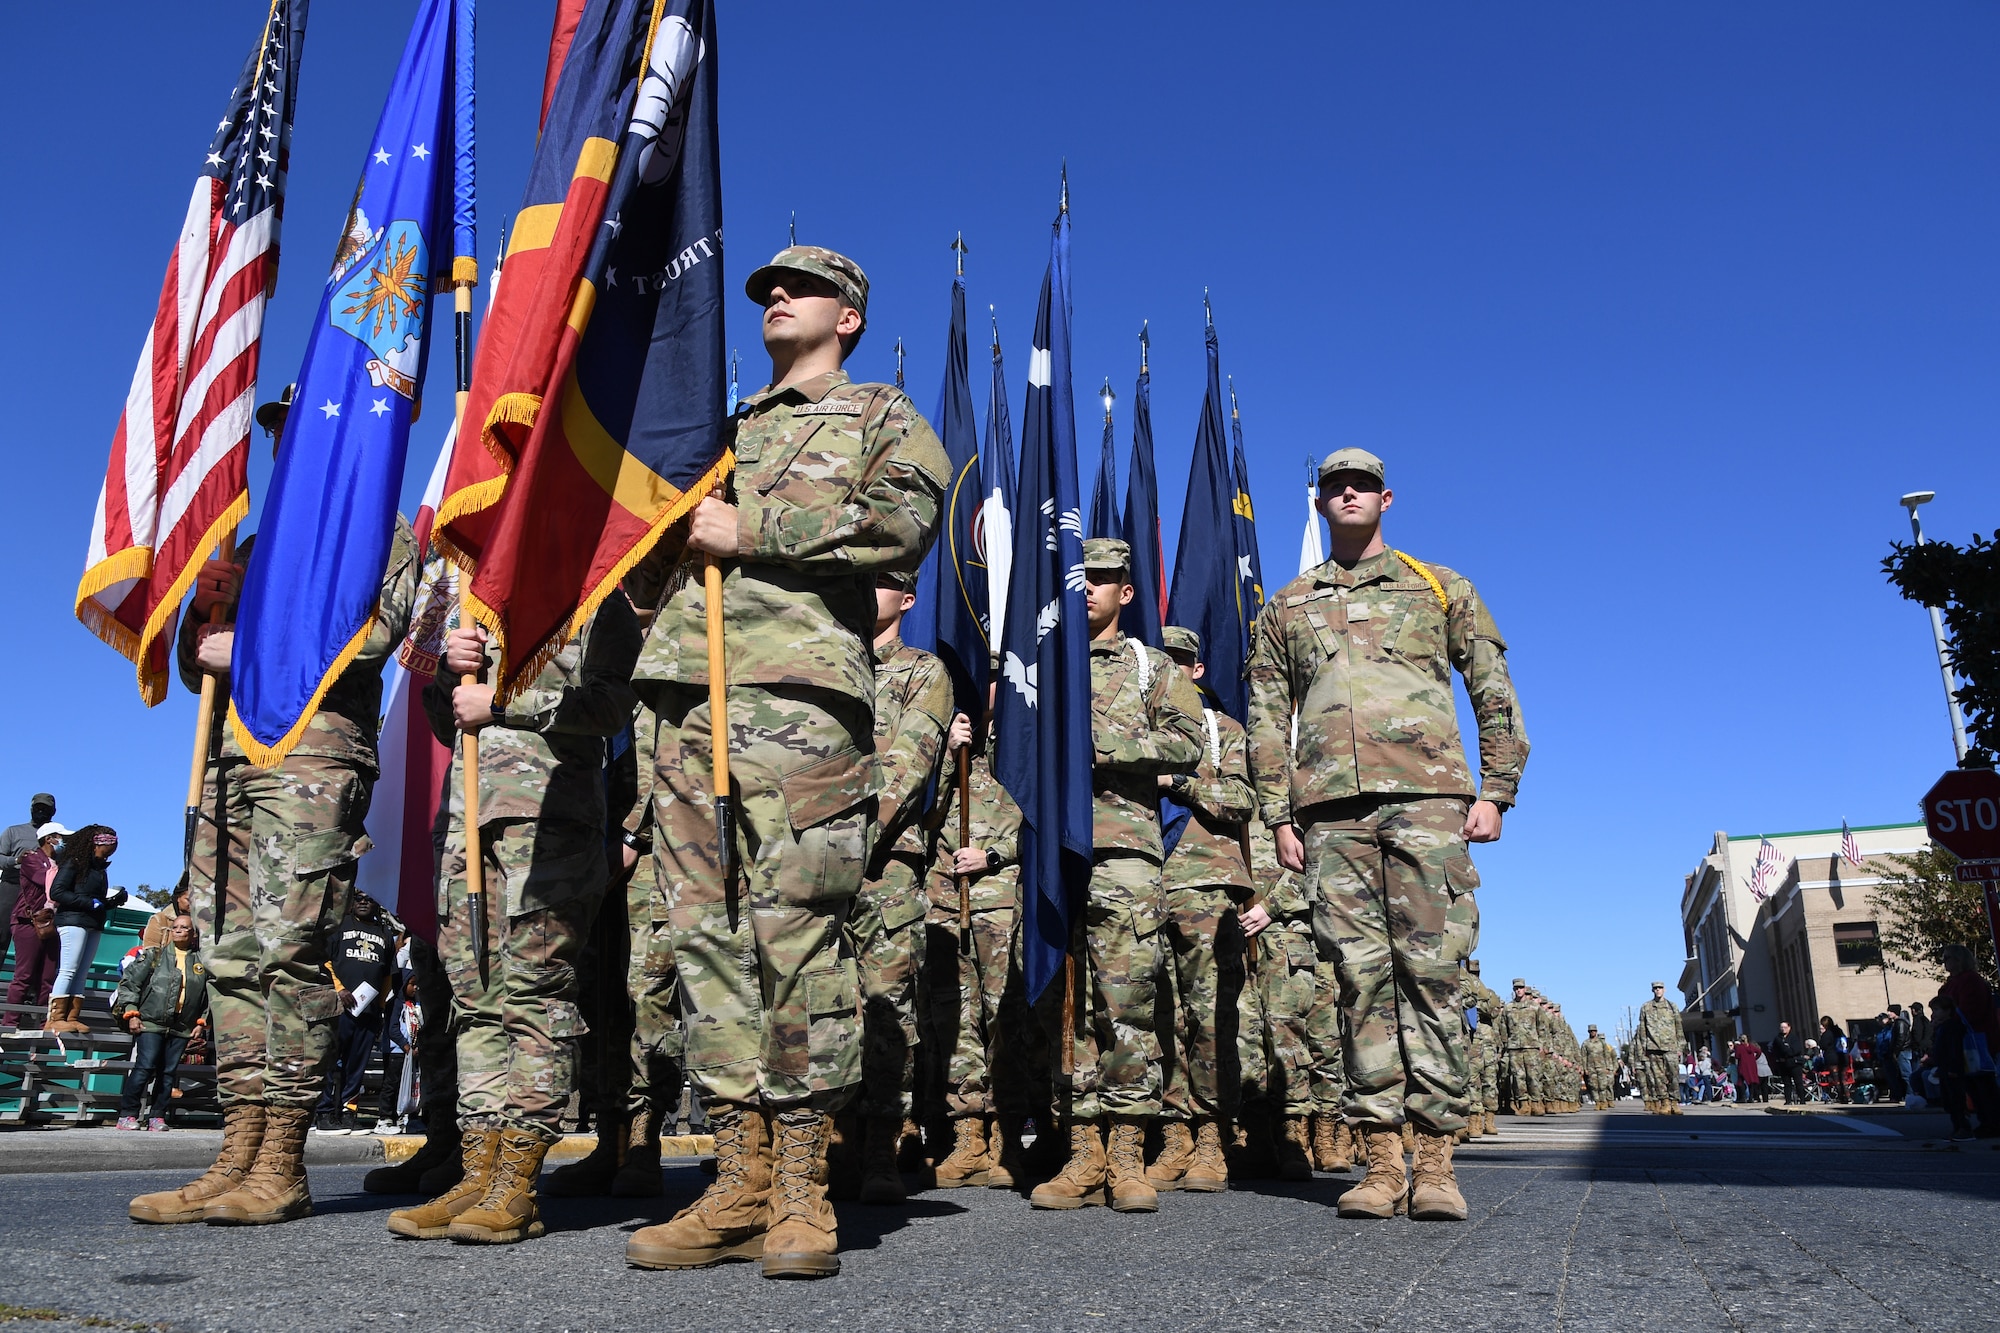 Airmen from the 81st Training Group carrying the 50 state flags march in the 21st Annual Gulf Coast Veterans Day Parade in Biloxi, Mississippi, Nov. 6, 2021. Keesler Air Force Base leadership, along with hundreds of Airmen, attended and participated in the parade in support of all veterans, past and present. More than 50 unique floats, marching bands and military units marched in the largest Veterans Day parade on the Gulf Coast. (U.S. Air Force photo by Kemberly Groue)